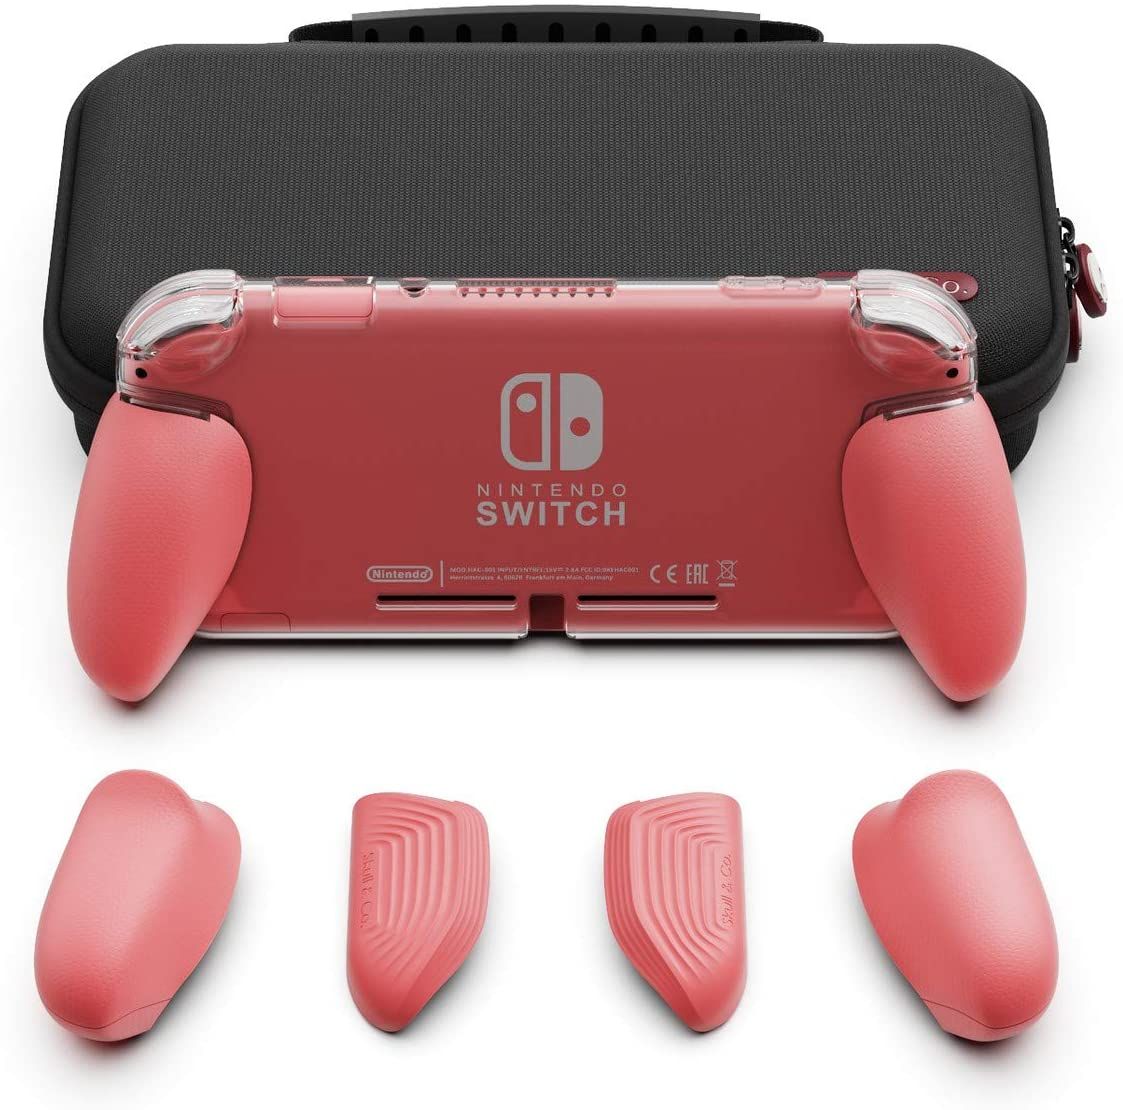 Who doesn't love a matching aesthetic? Skull & Co's Switch grip offering allows you to customize the back grips to match your Switch Lite's console color. You'll also get a case to put your Switch Lite away in.